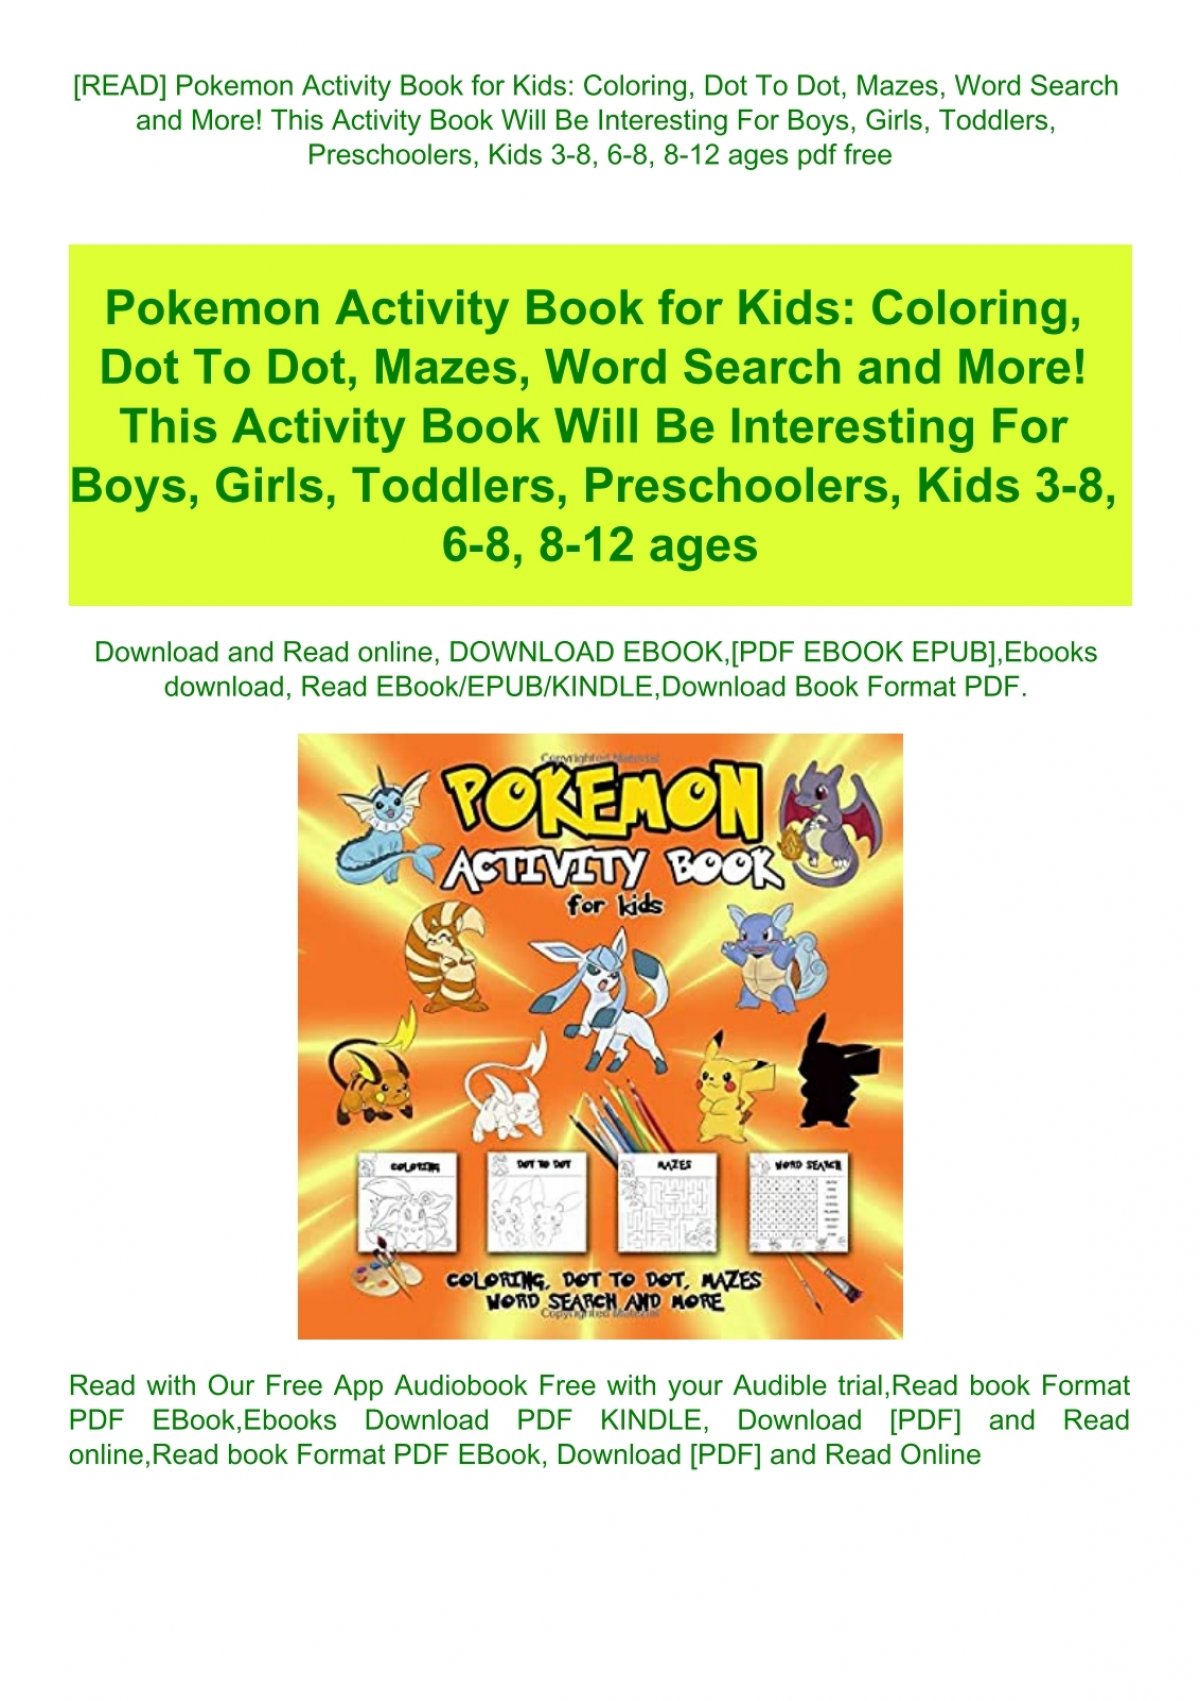 Read Pokemon Activity Book For Kids Coloring Dot To Dot Mazes Word Search And More This Activity Book Will Be Interesting For Boys Girls Toddlers Preschoolers Kids 3 8 6 8 8 12 Ages Pdf Free